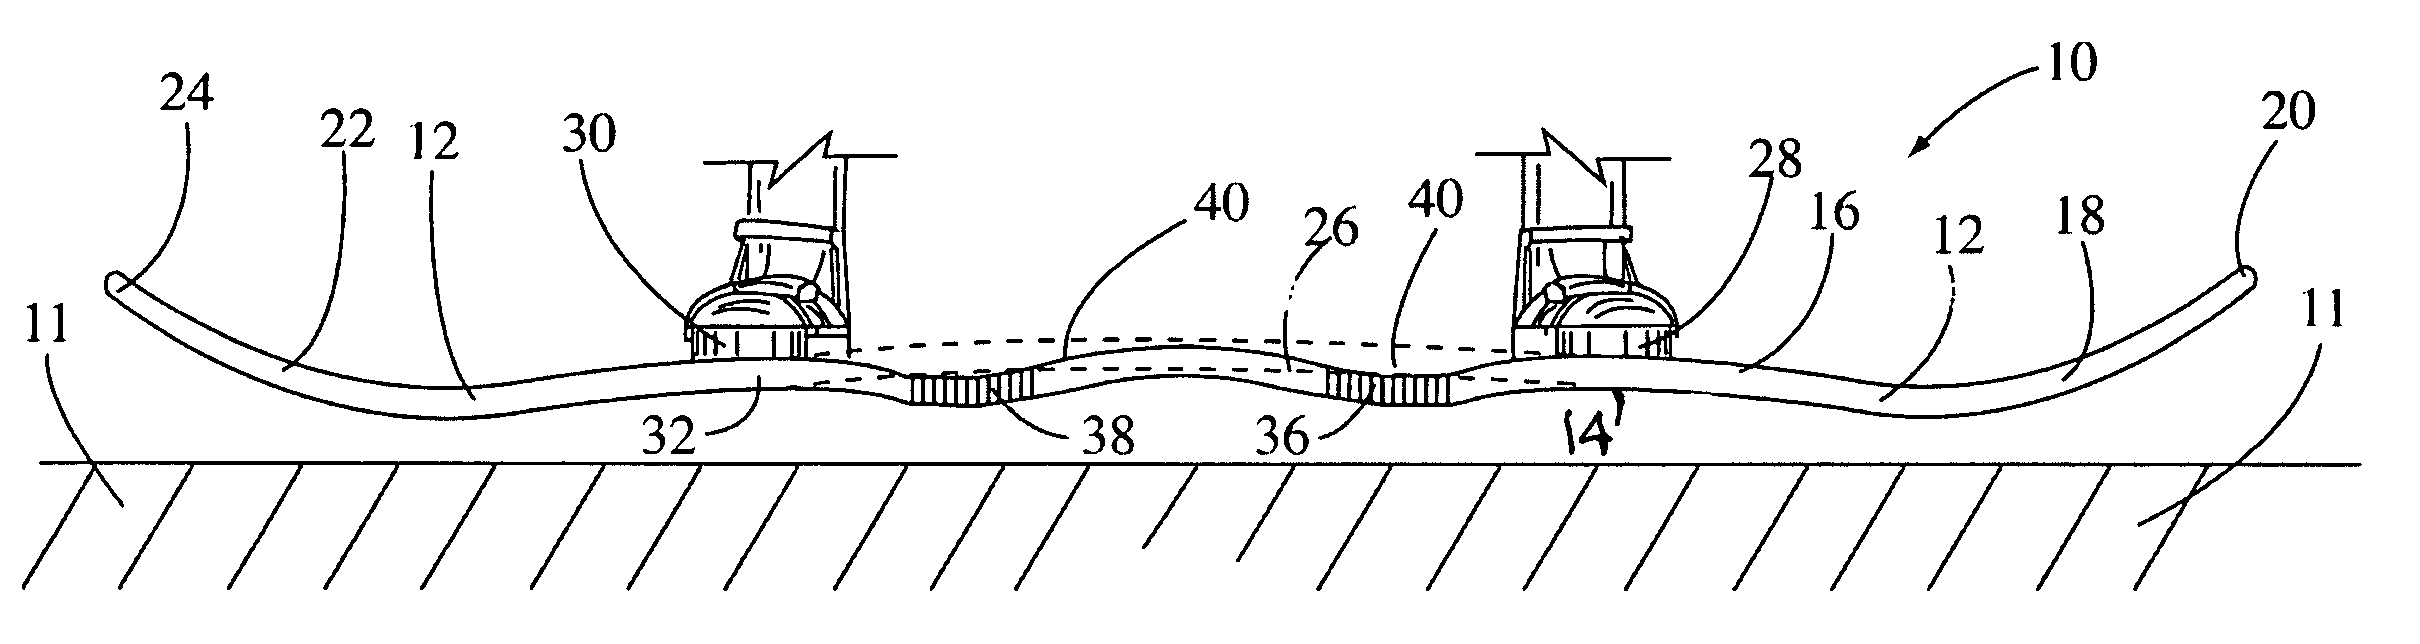 Bi-directional snowboard with parallel reverse cambers for reduced snow contact and with traction planes for increased edge control